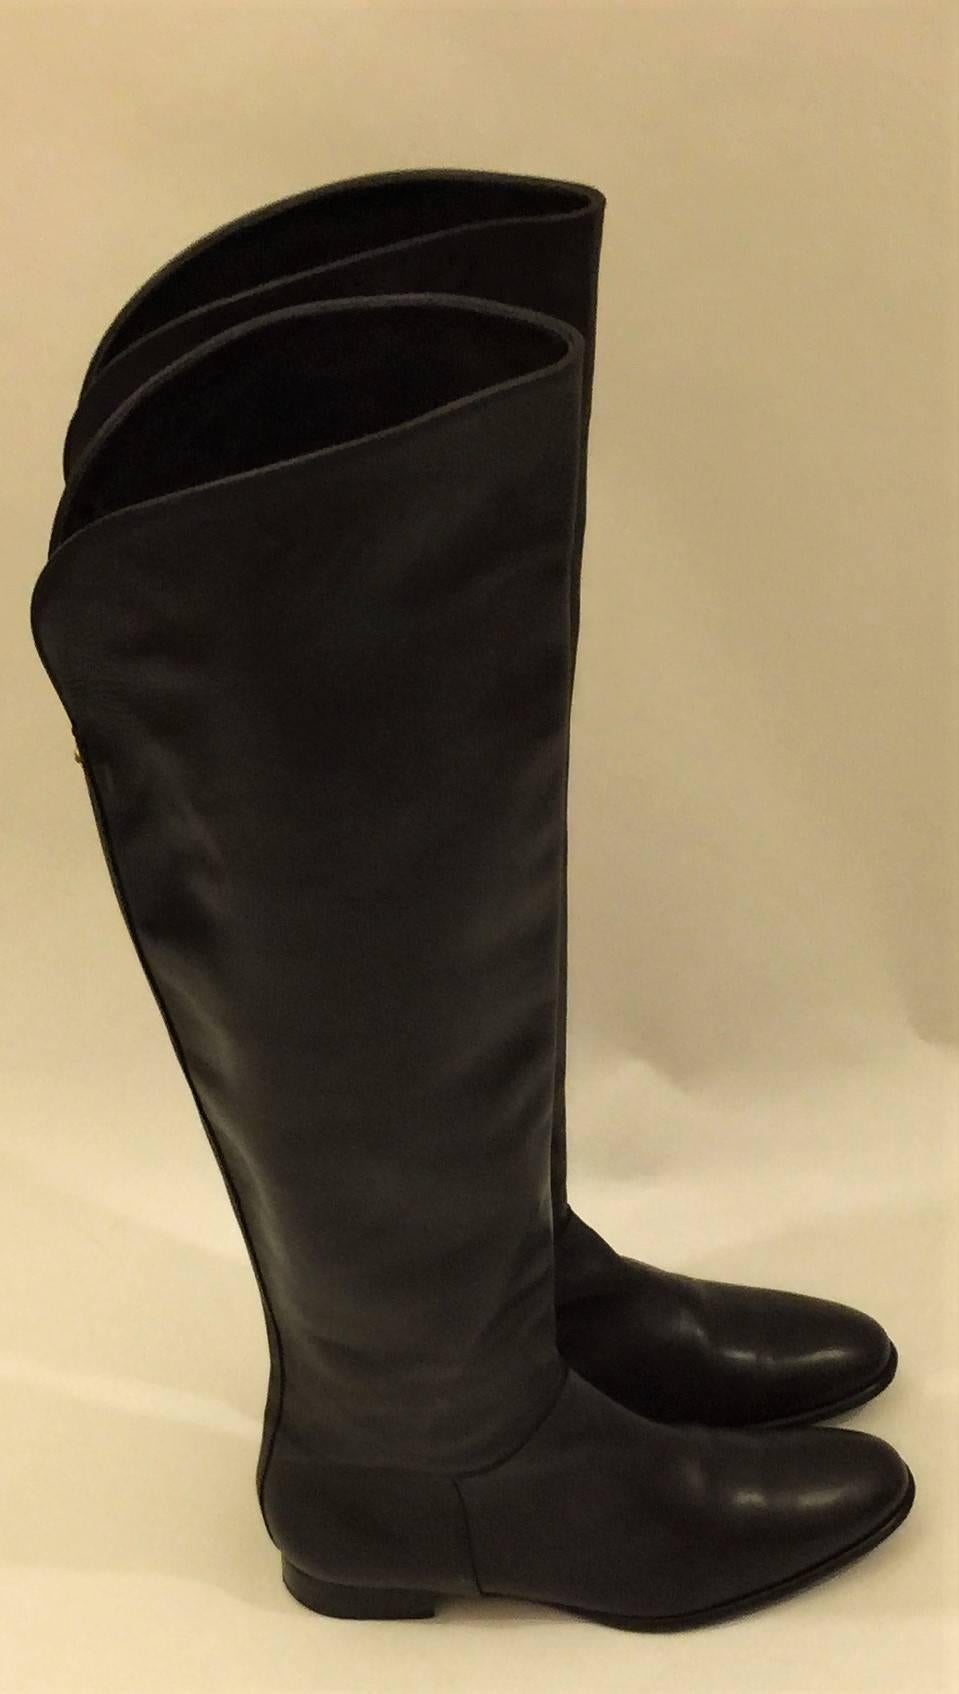 Loro Piana Iconic hand-made 100% Leather Knee High with turn-back Cuff Boots.  These Boots are of the highest level of quality and are ready to wear - a very versatile addition to any wardrobe.  Fashion’s sharp gaze is now focused on your feet, as